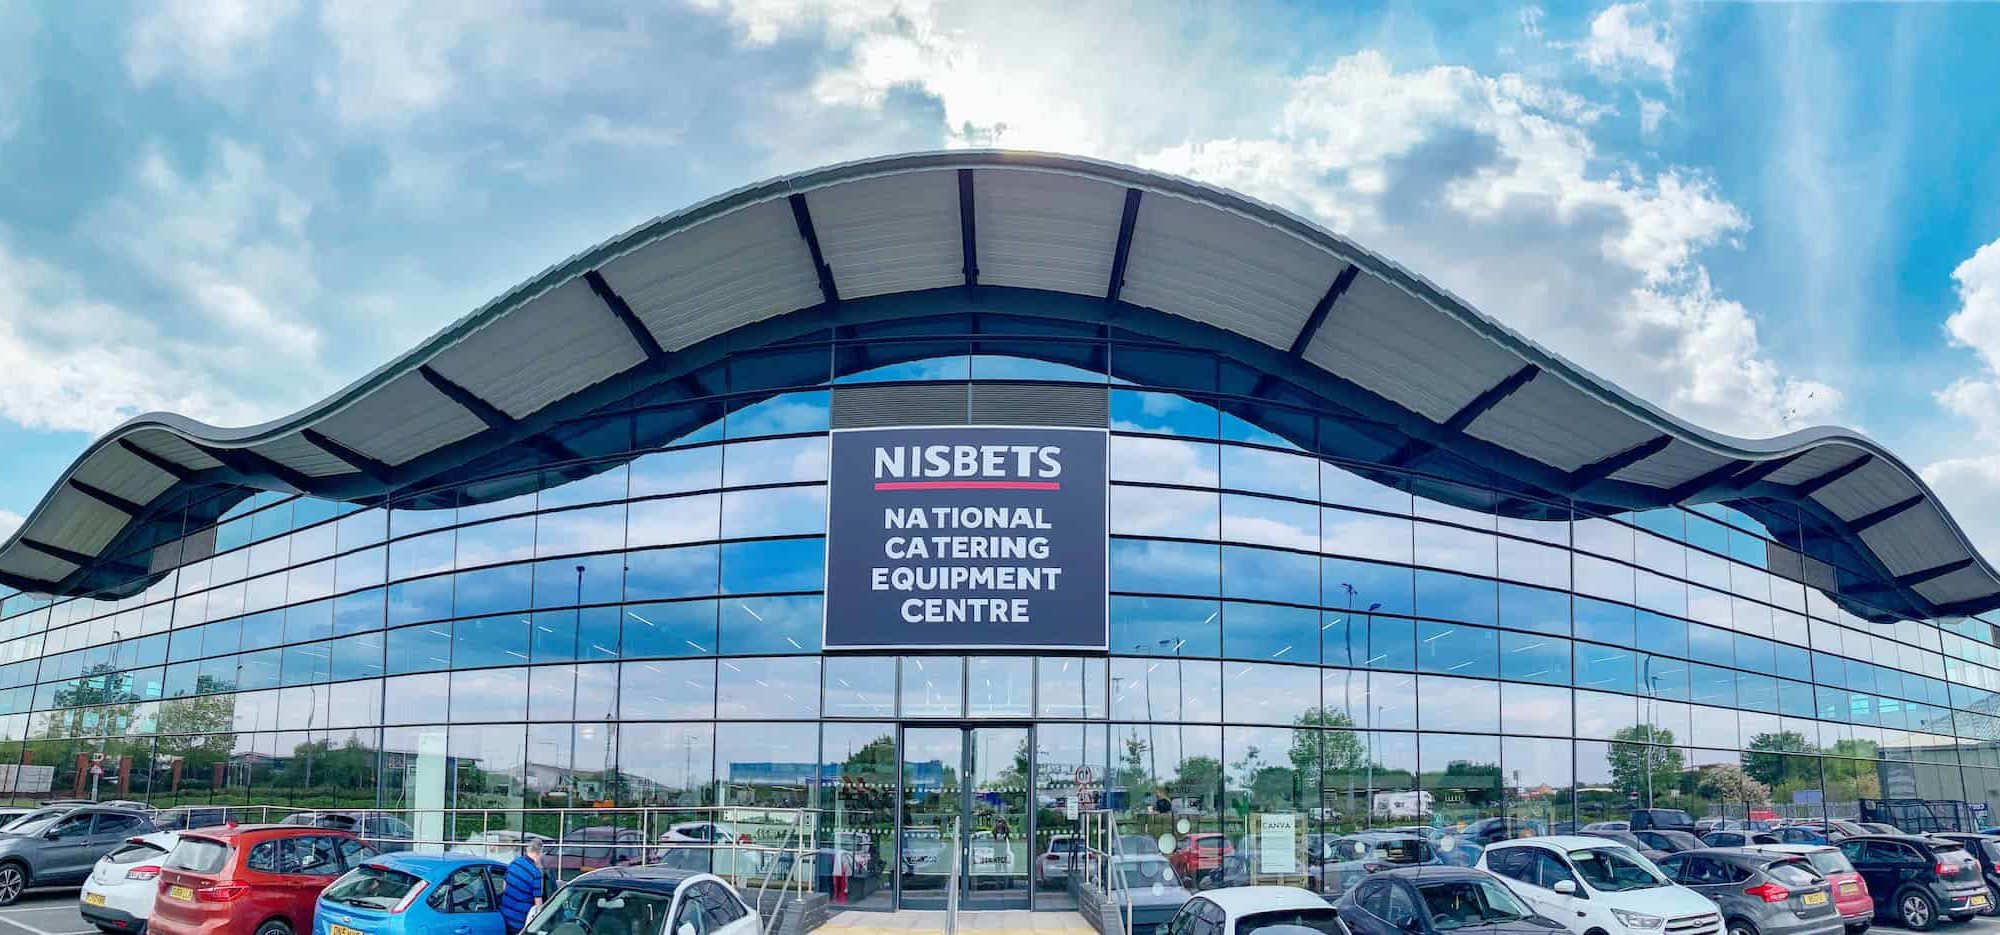 Nisbets owner seeks investment to fuel expansion